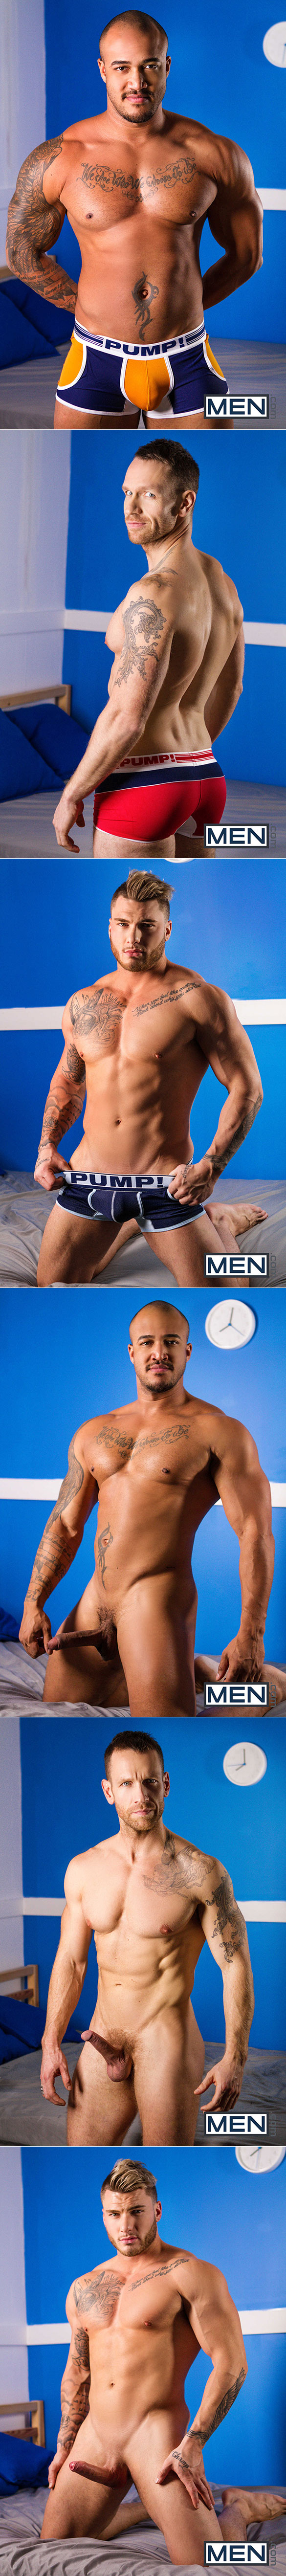 Men.com: William Seed and Jason Vario tag team Kit Cohen in "Screamers, Part 1"